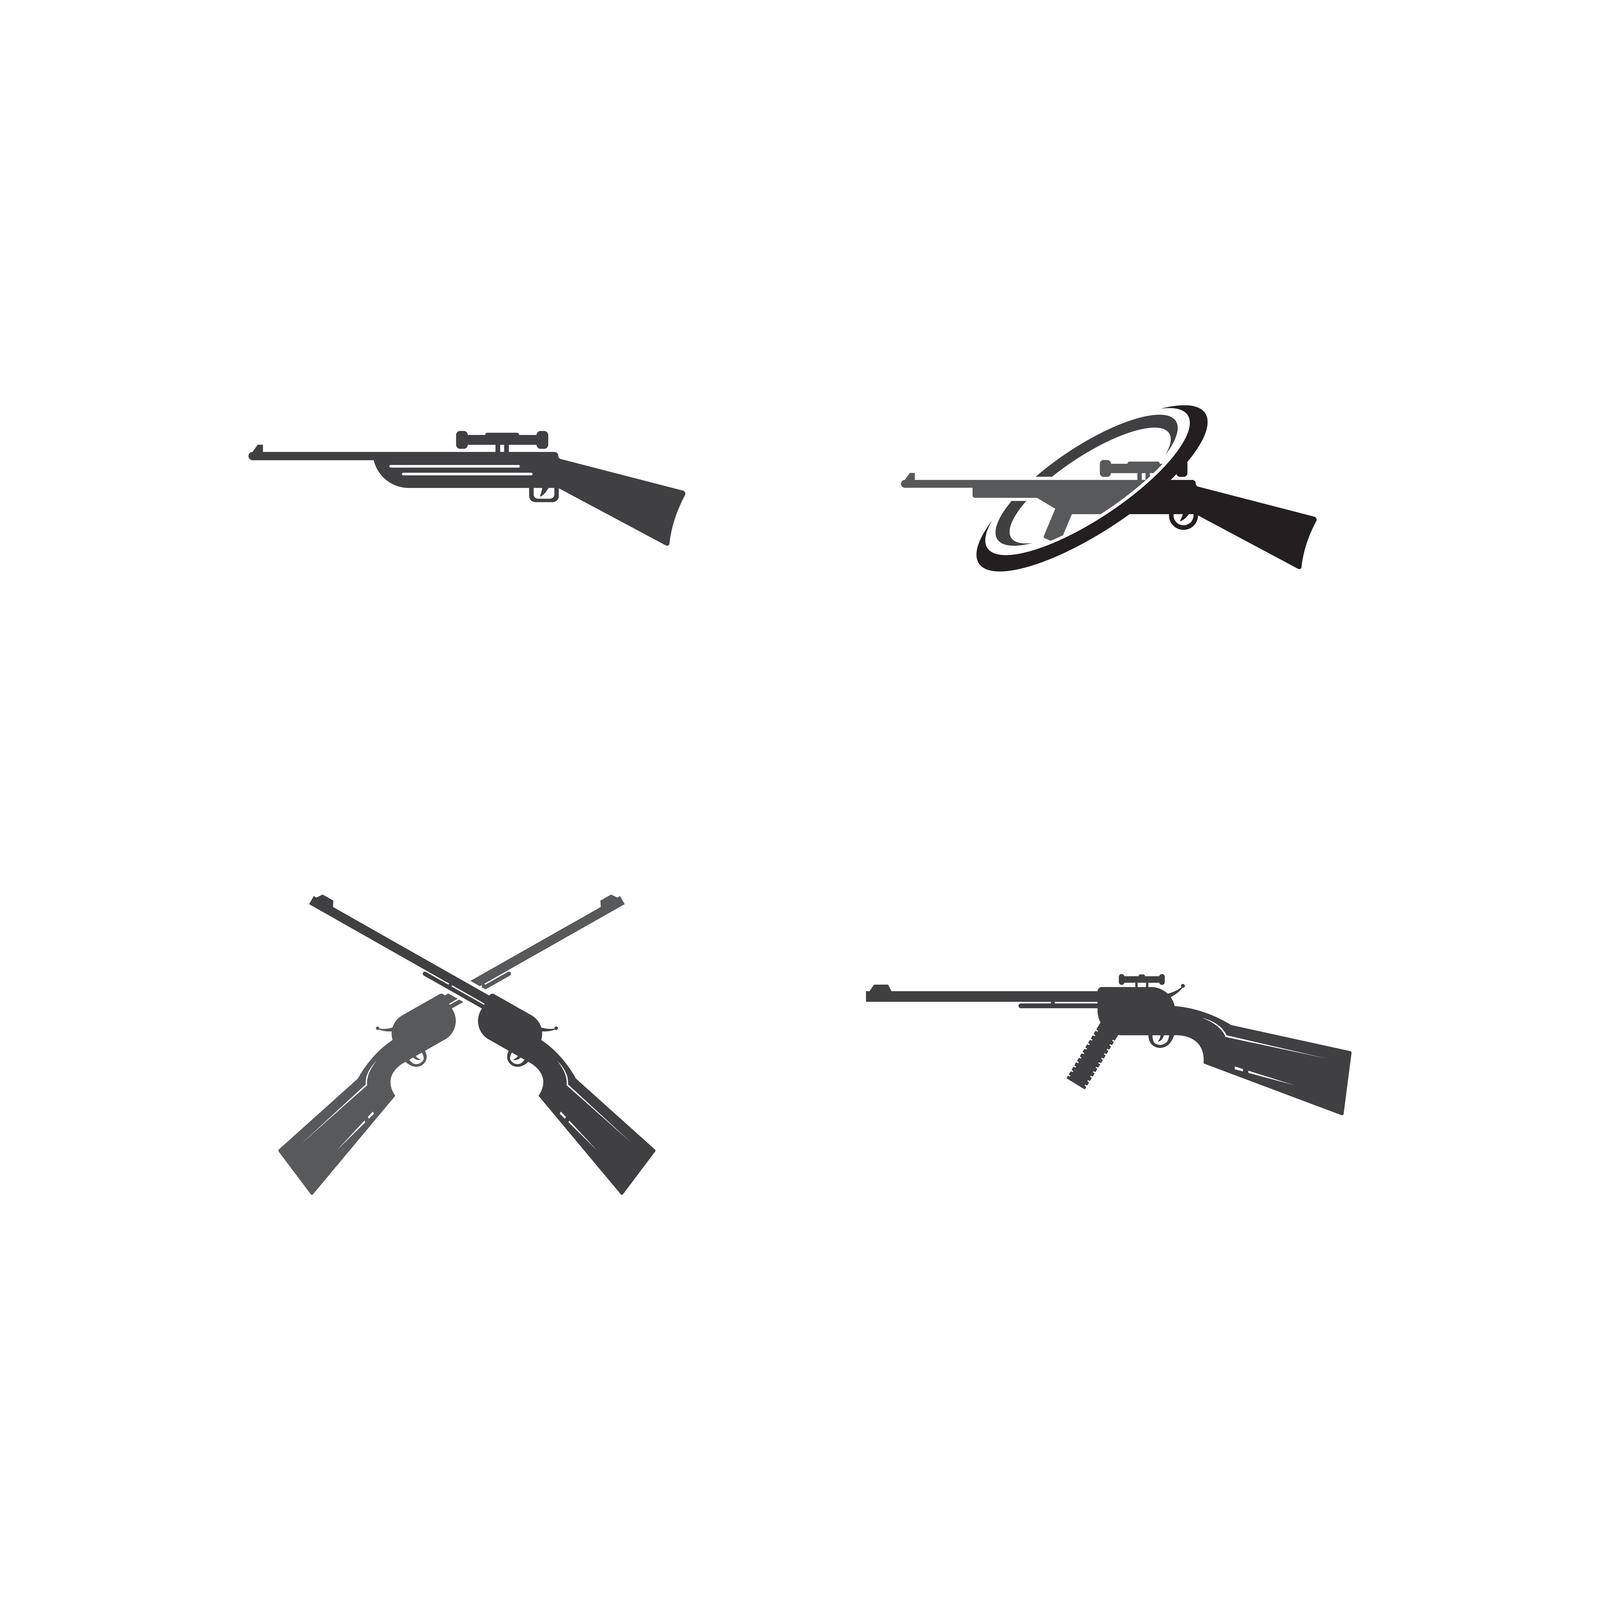 Sniper hunting rifle icons by Amin89